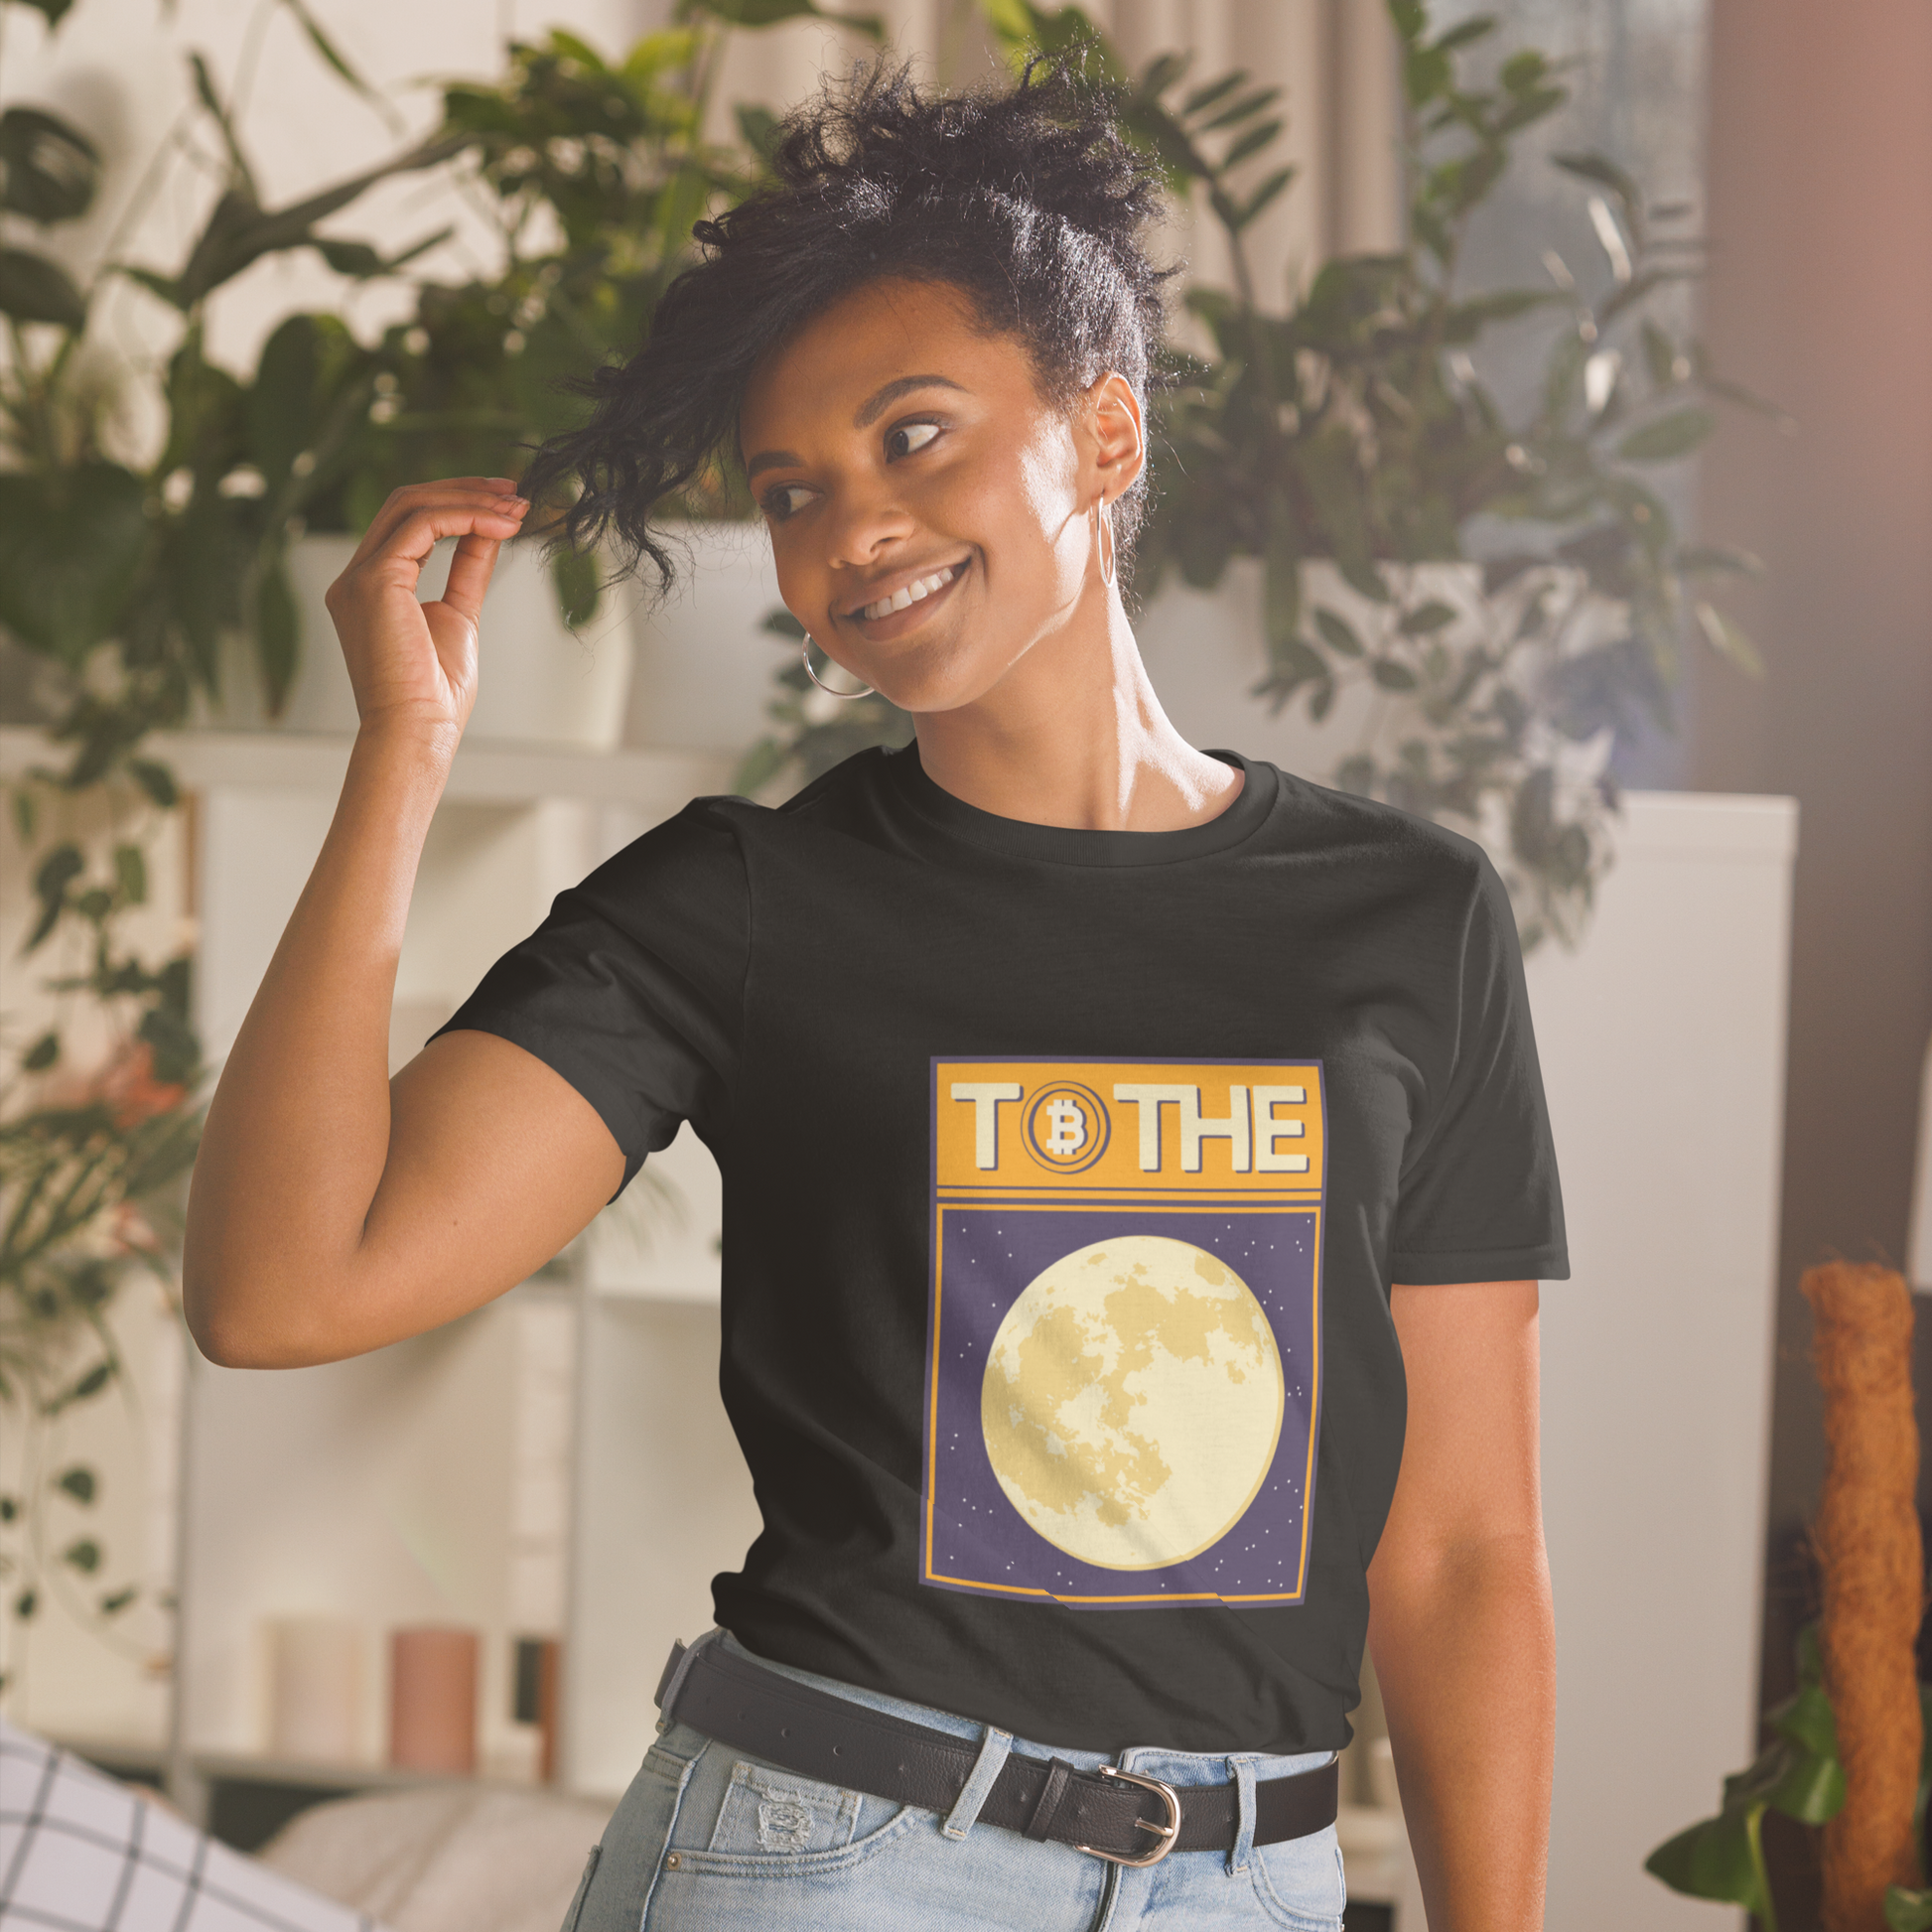 Smiling woman wearing a Black Bitcoin T-Shirt featuring a funny To The Moon graphic on the chest - Cool Graphic Bitcoin T-Shirts - Boozy Fox